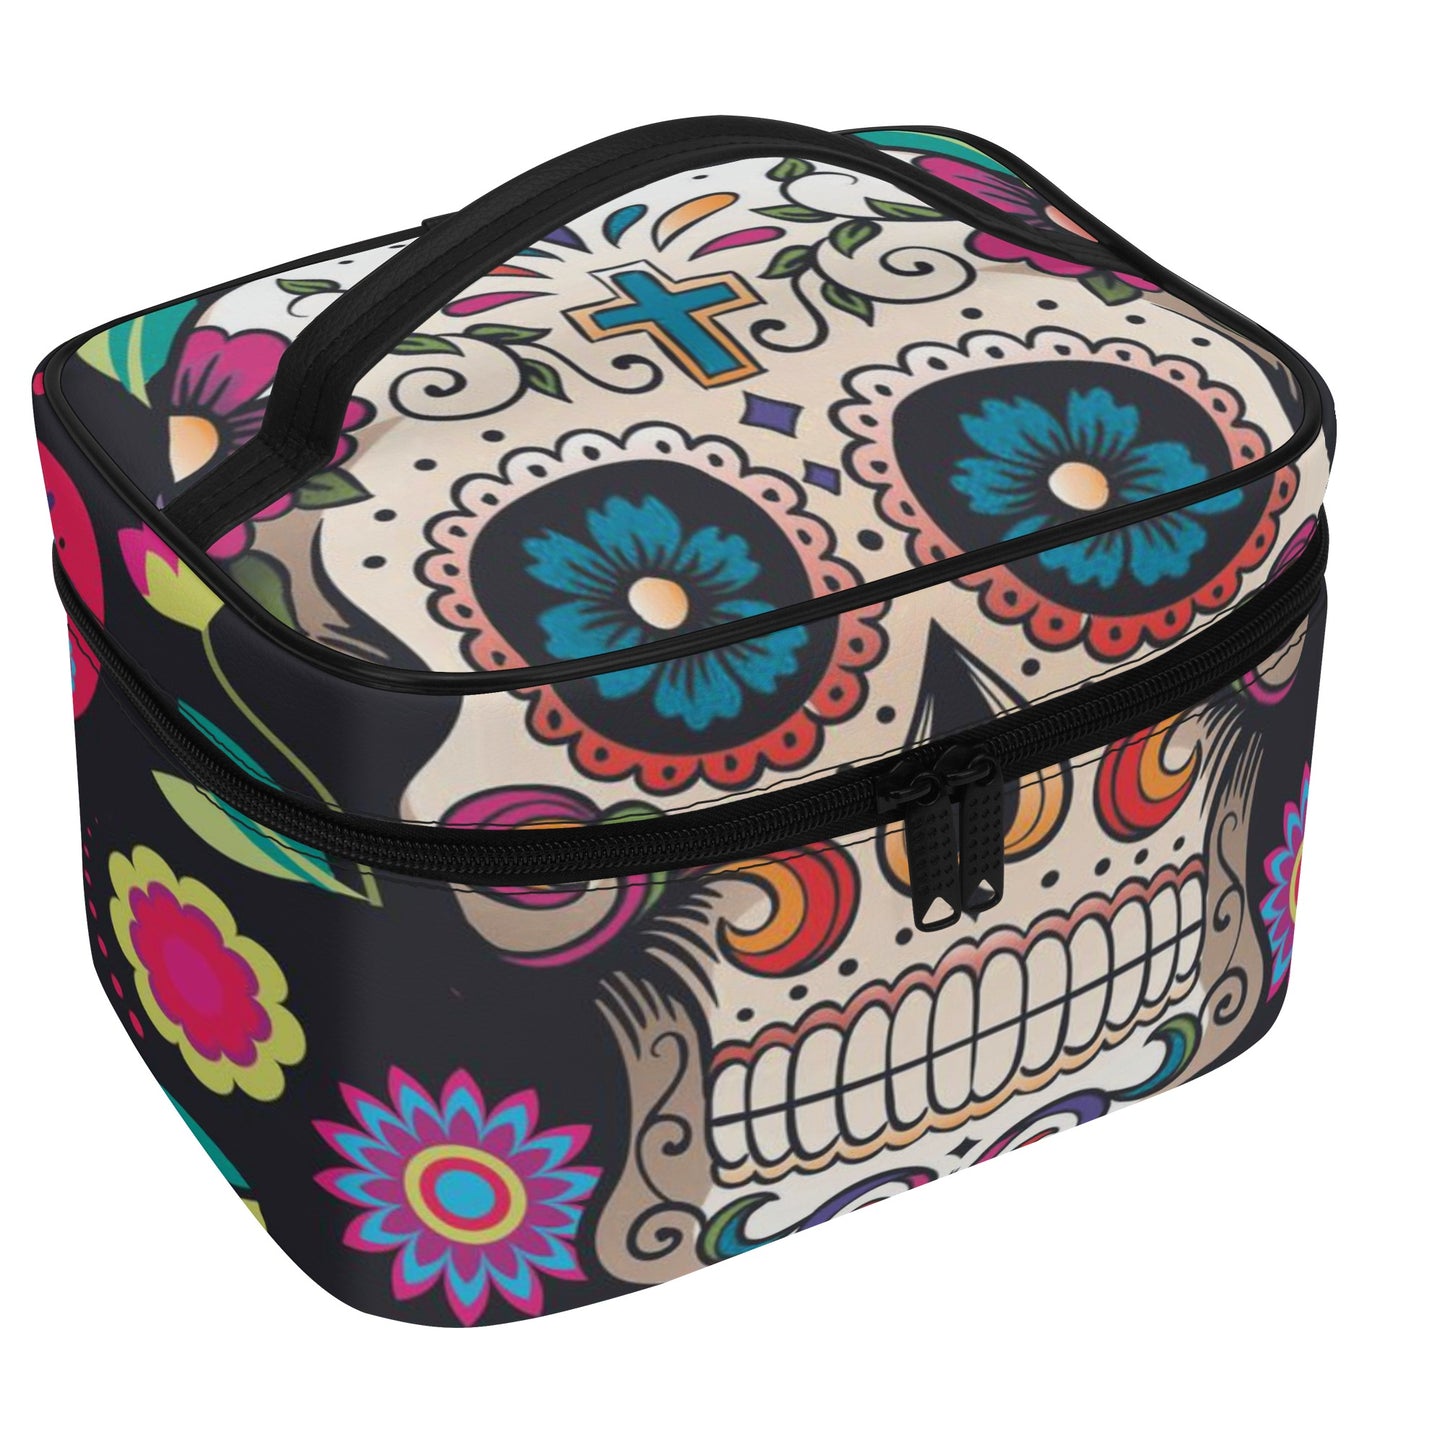 Sugar skull Day of the dead Halloweeen gothic All Over Printing Leather Cosmetic Bag